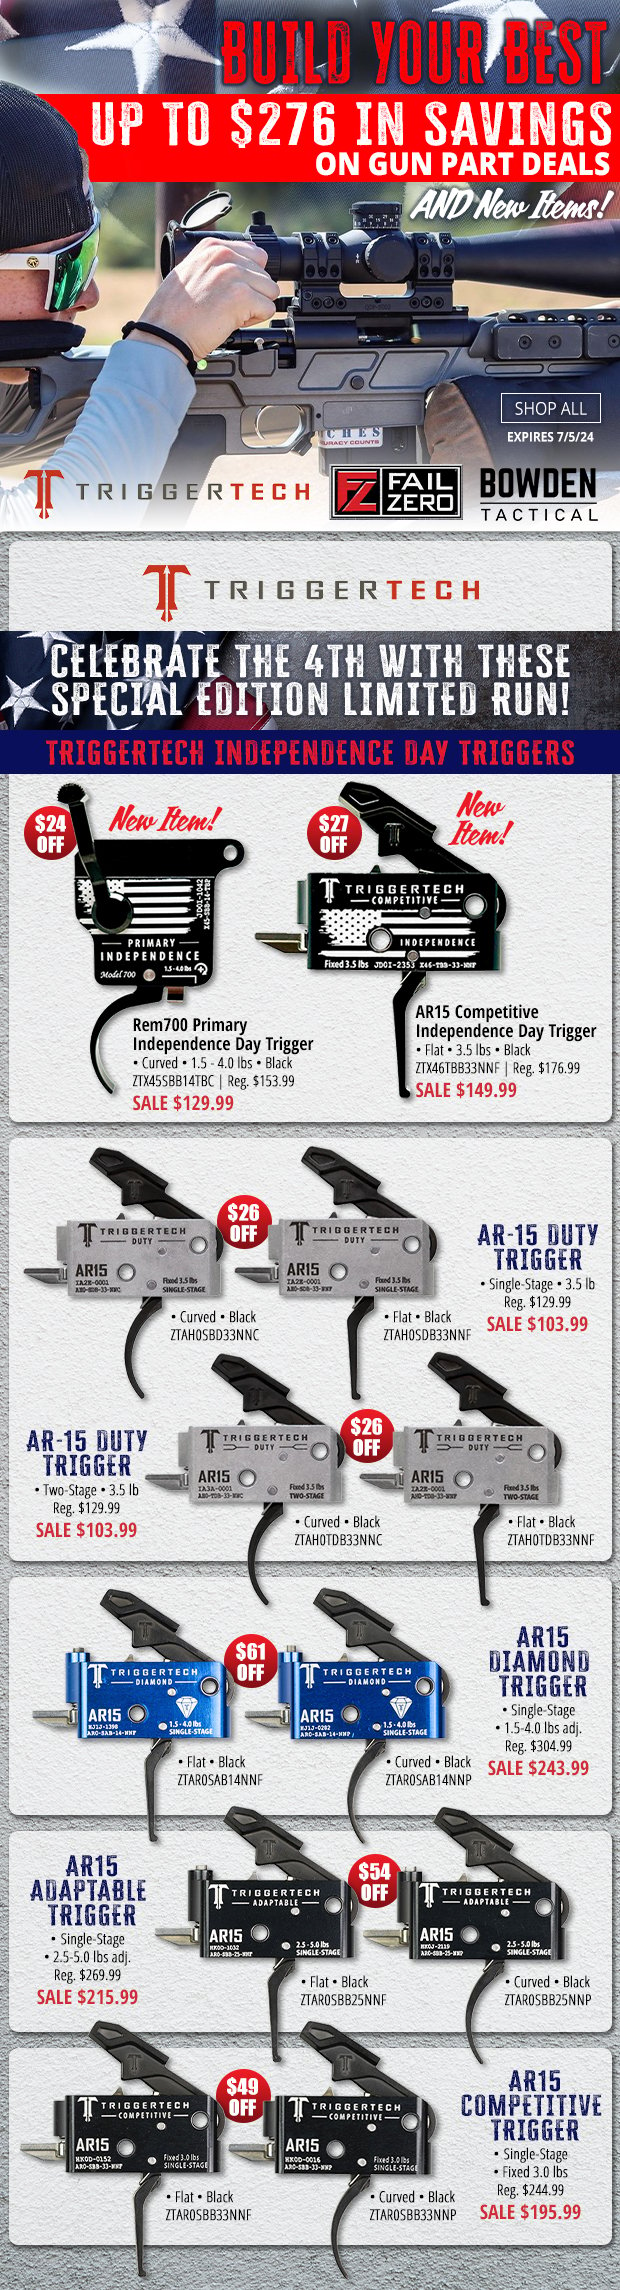 Up to $276 in Savings on Gun Part Deals